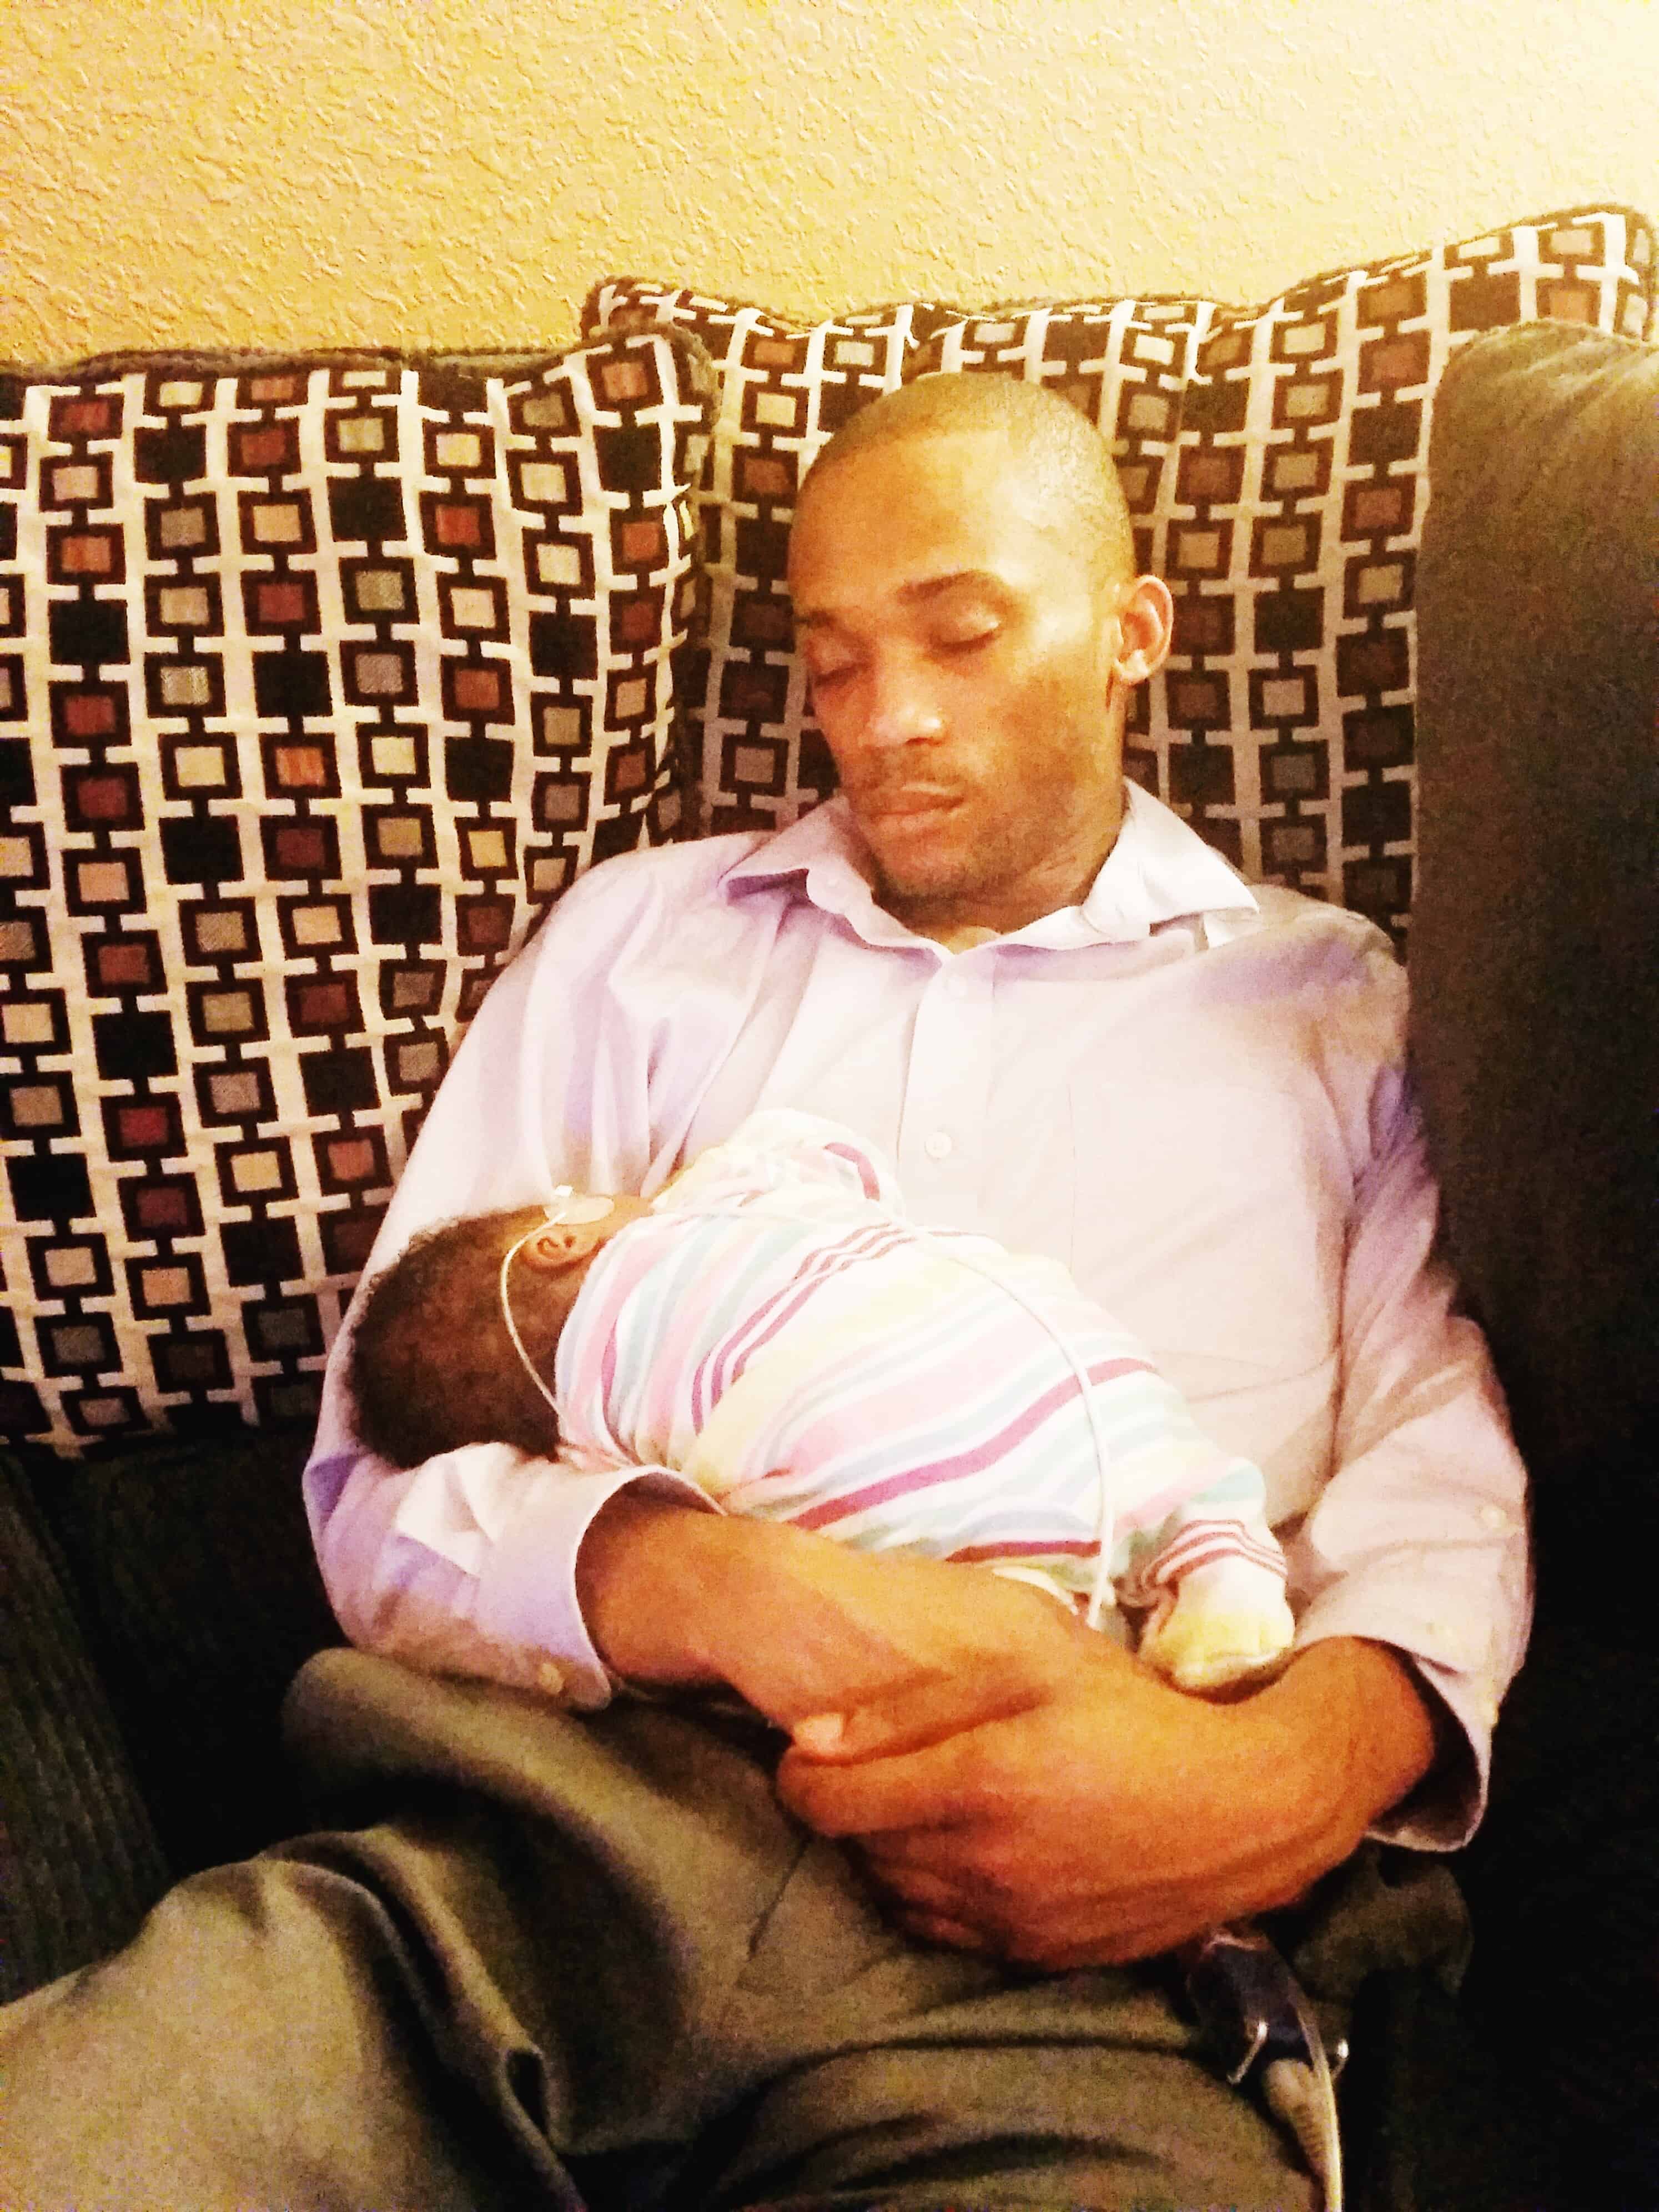 dad sleeping on couch and holding newborn baby gift for newborn twins